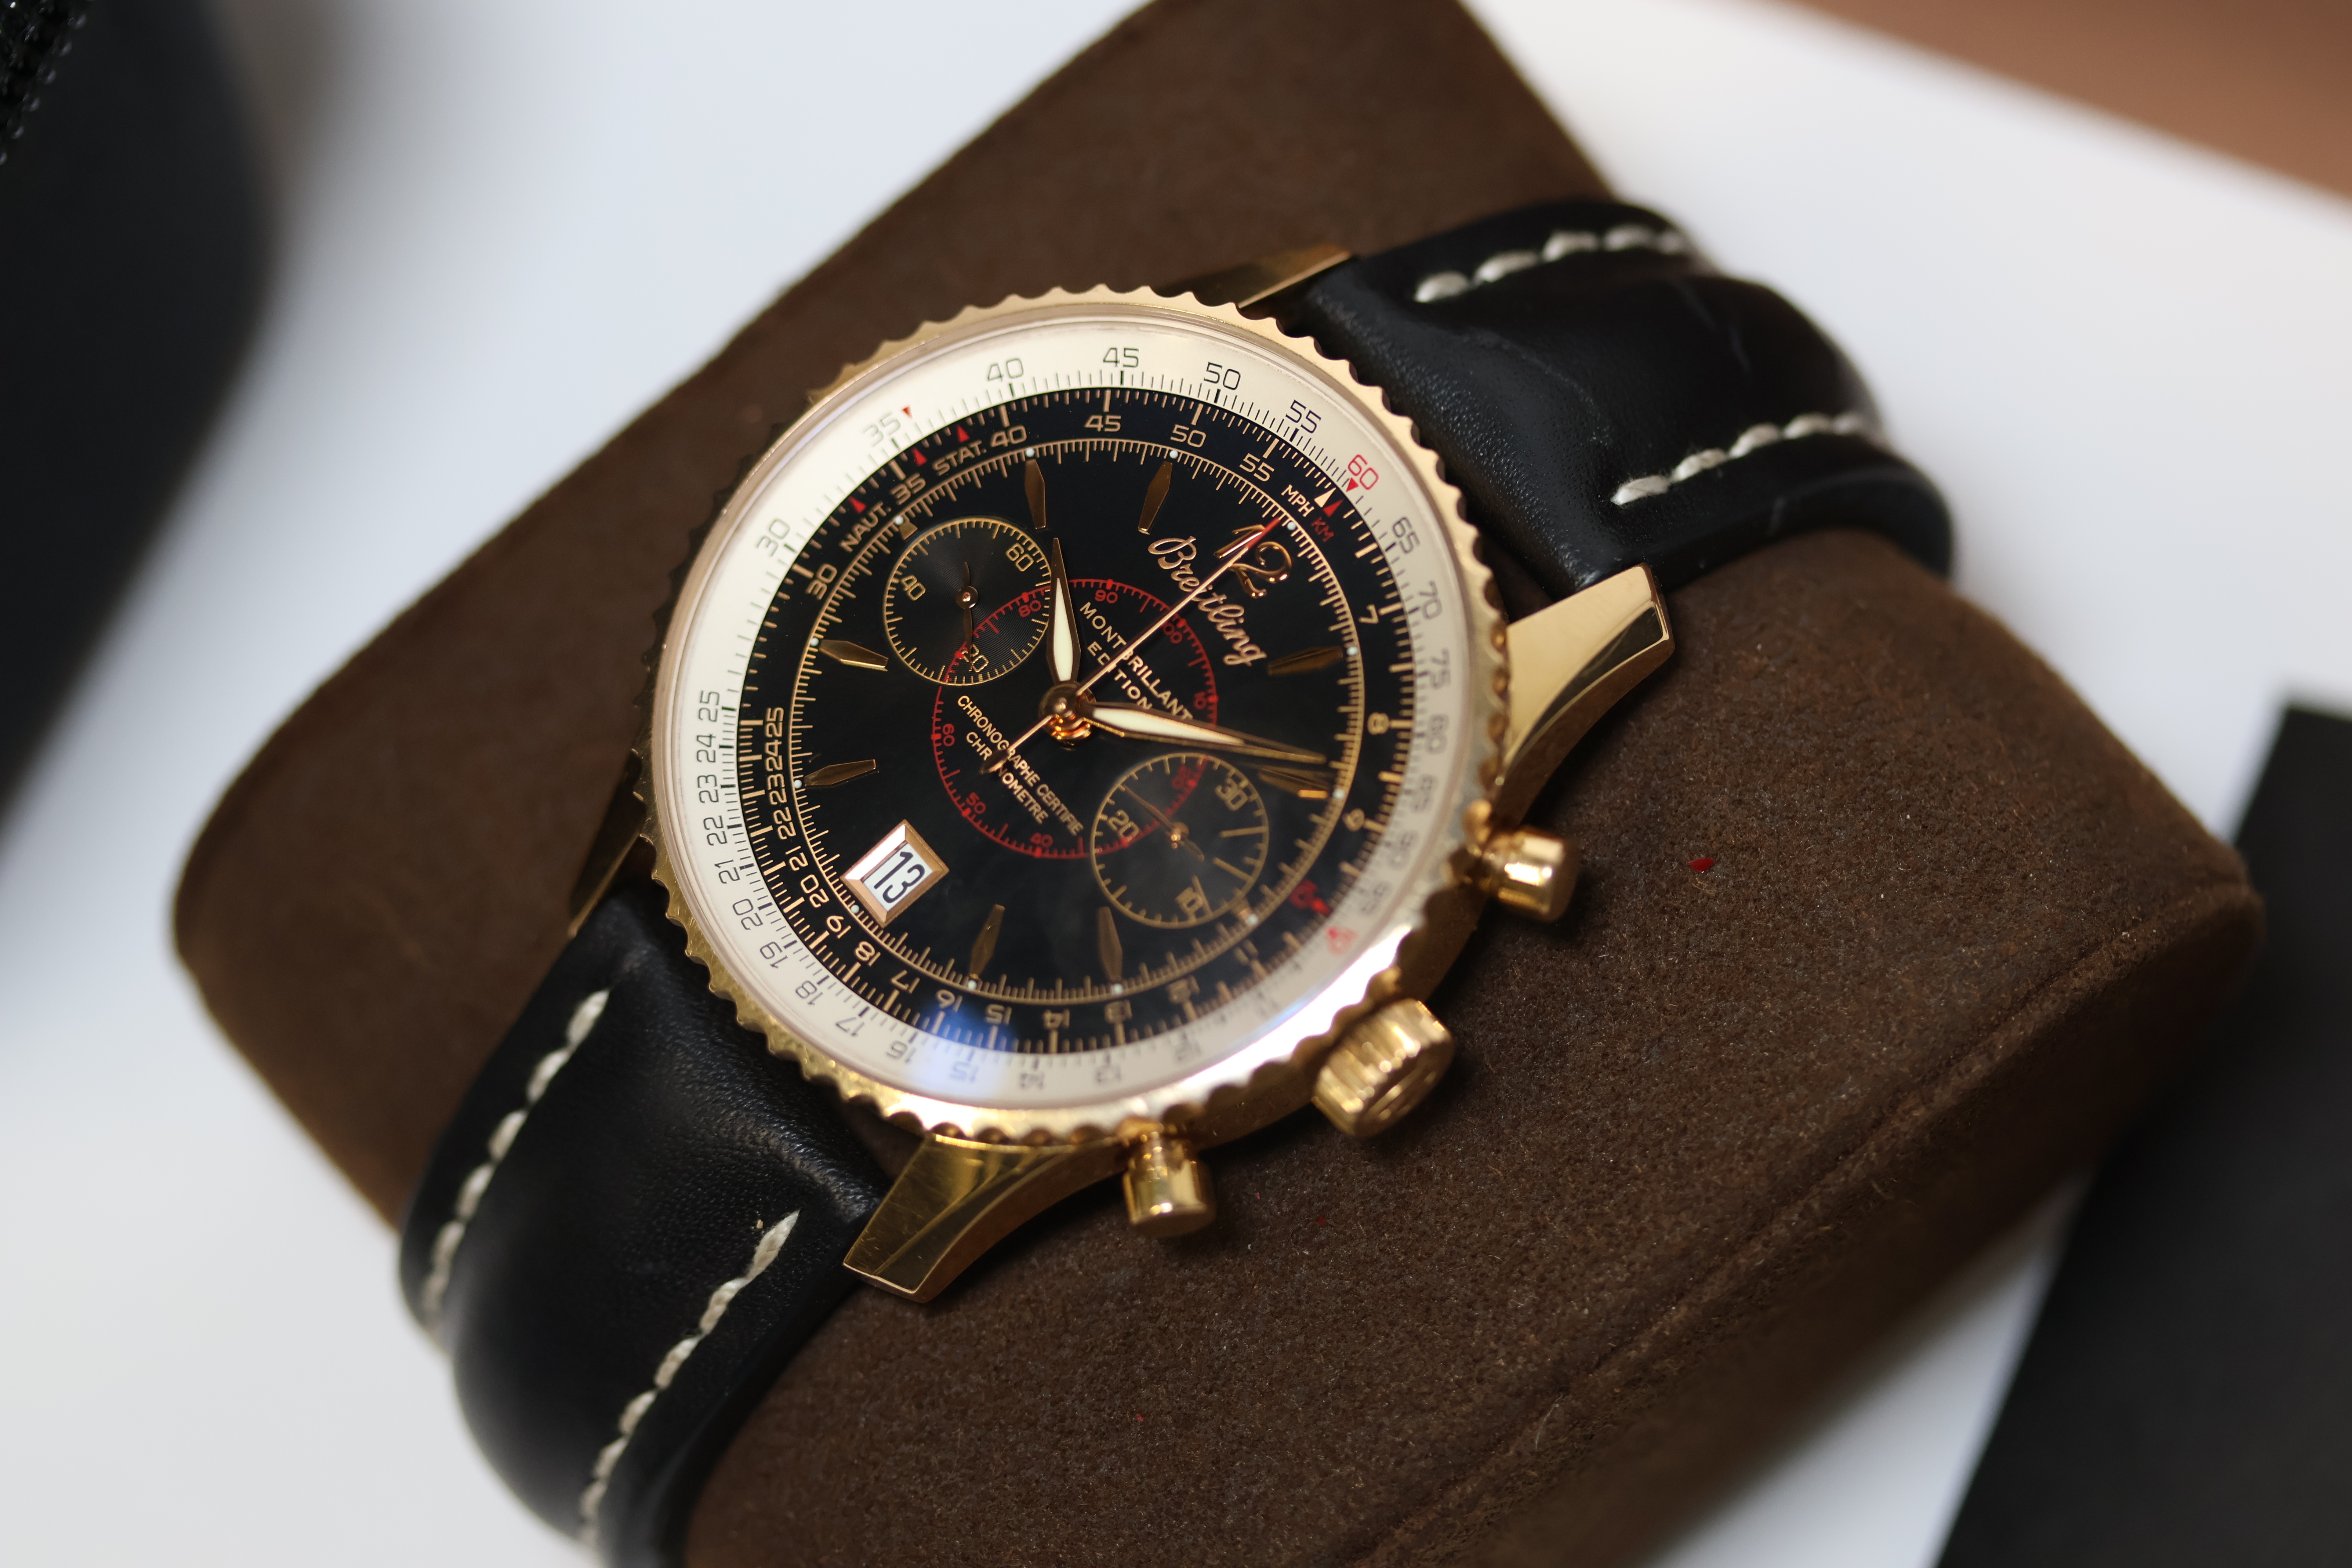 Breitling Montbrilliant Limited Edition 18ct Yellow Gold Chronograph Manual Wind with Box - Image 2 of 7